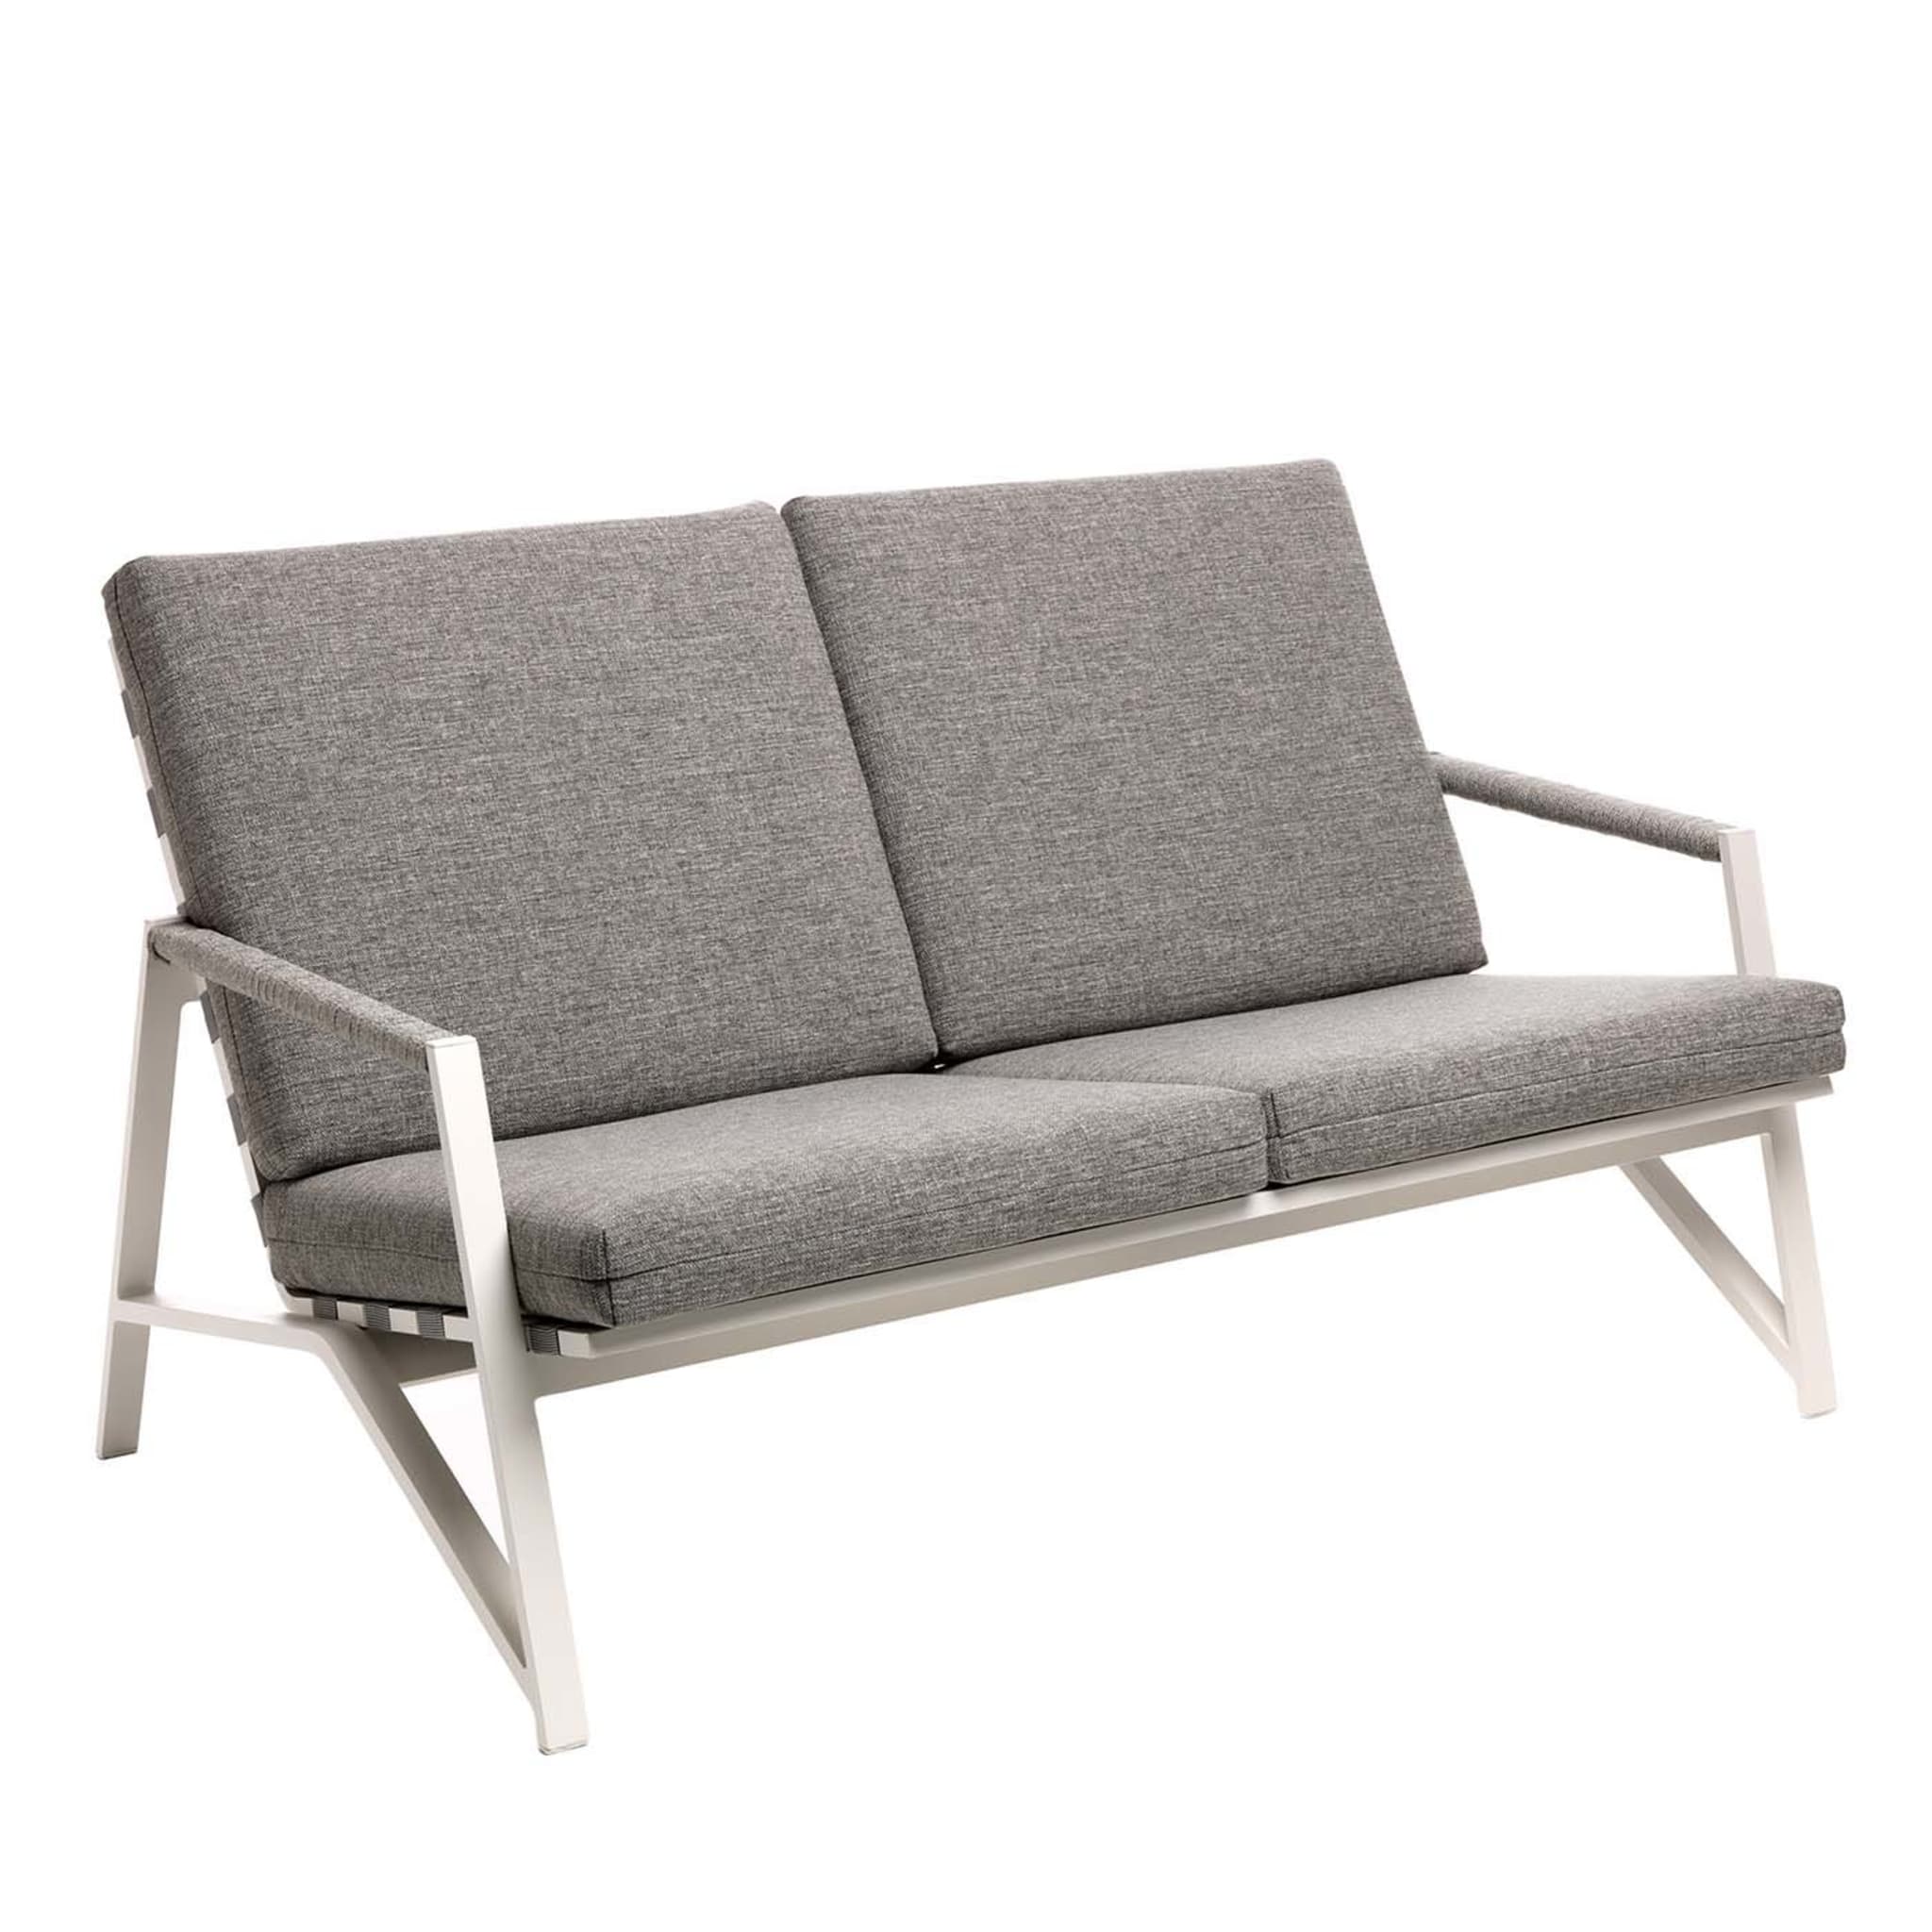 Cottage Gray 2-Seat Sofa with White Frame - Main view